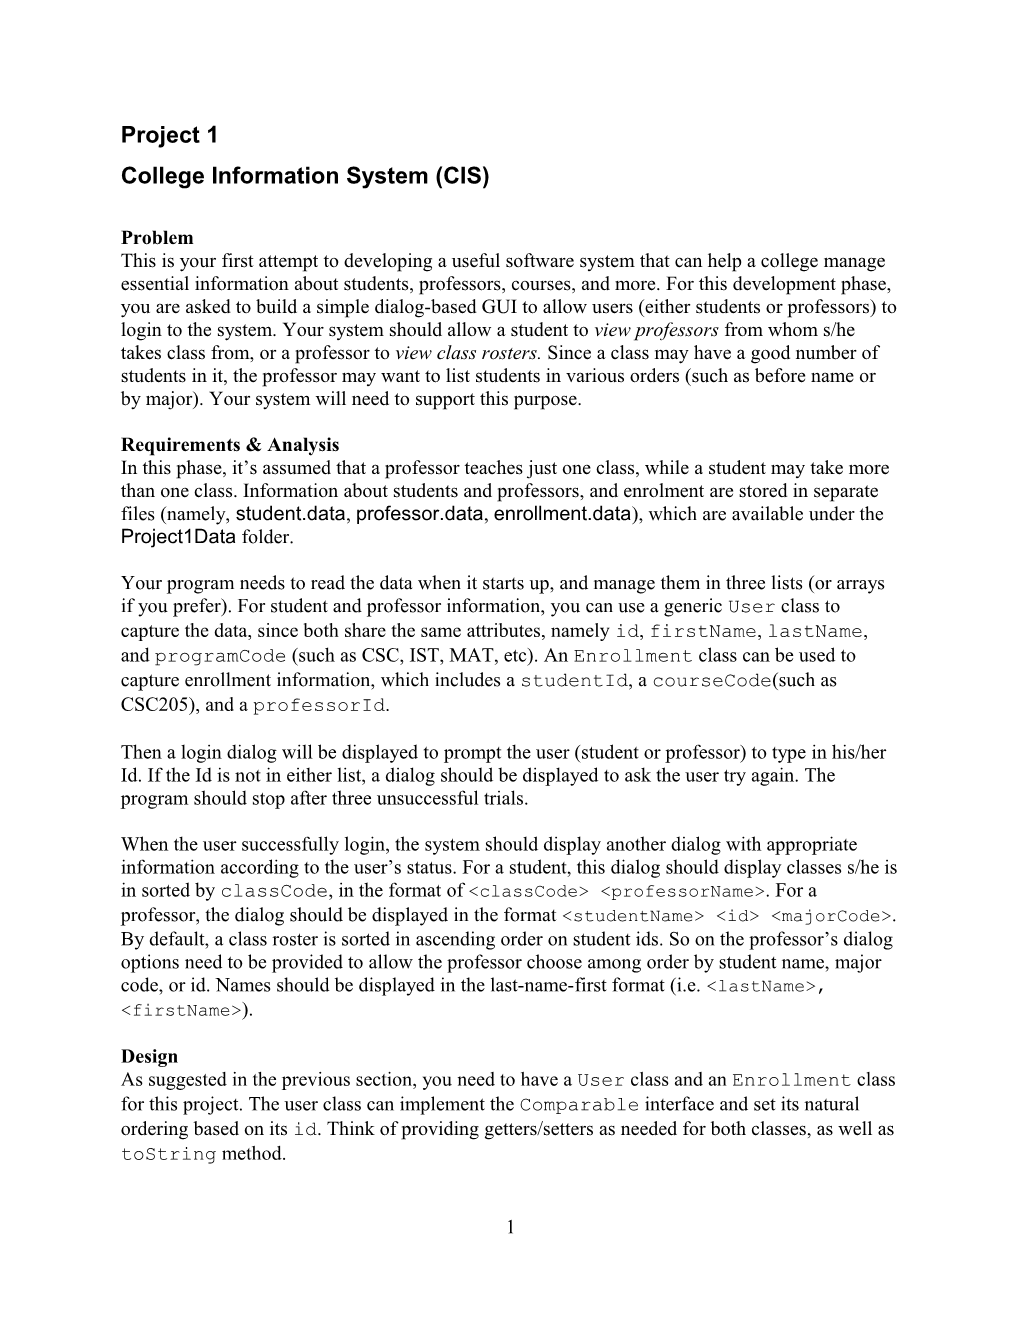 College Information System (CIS)